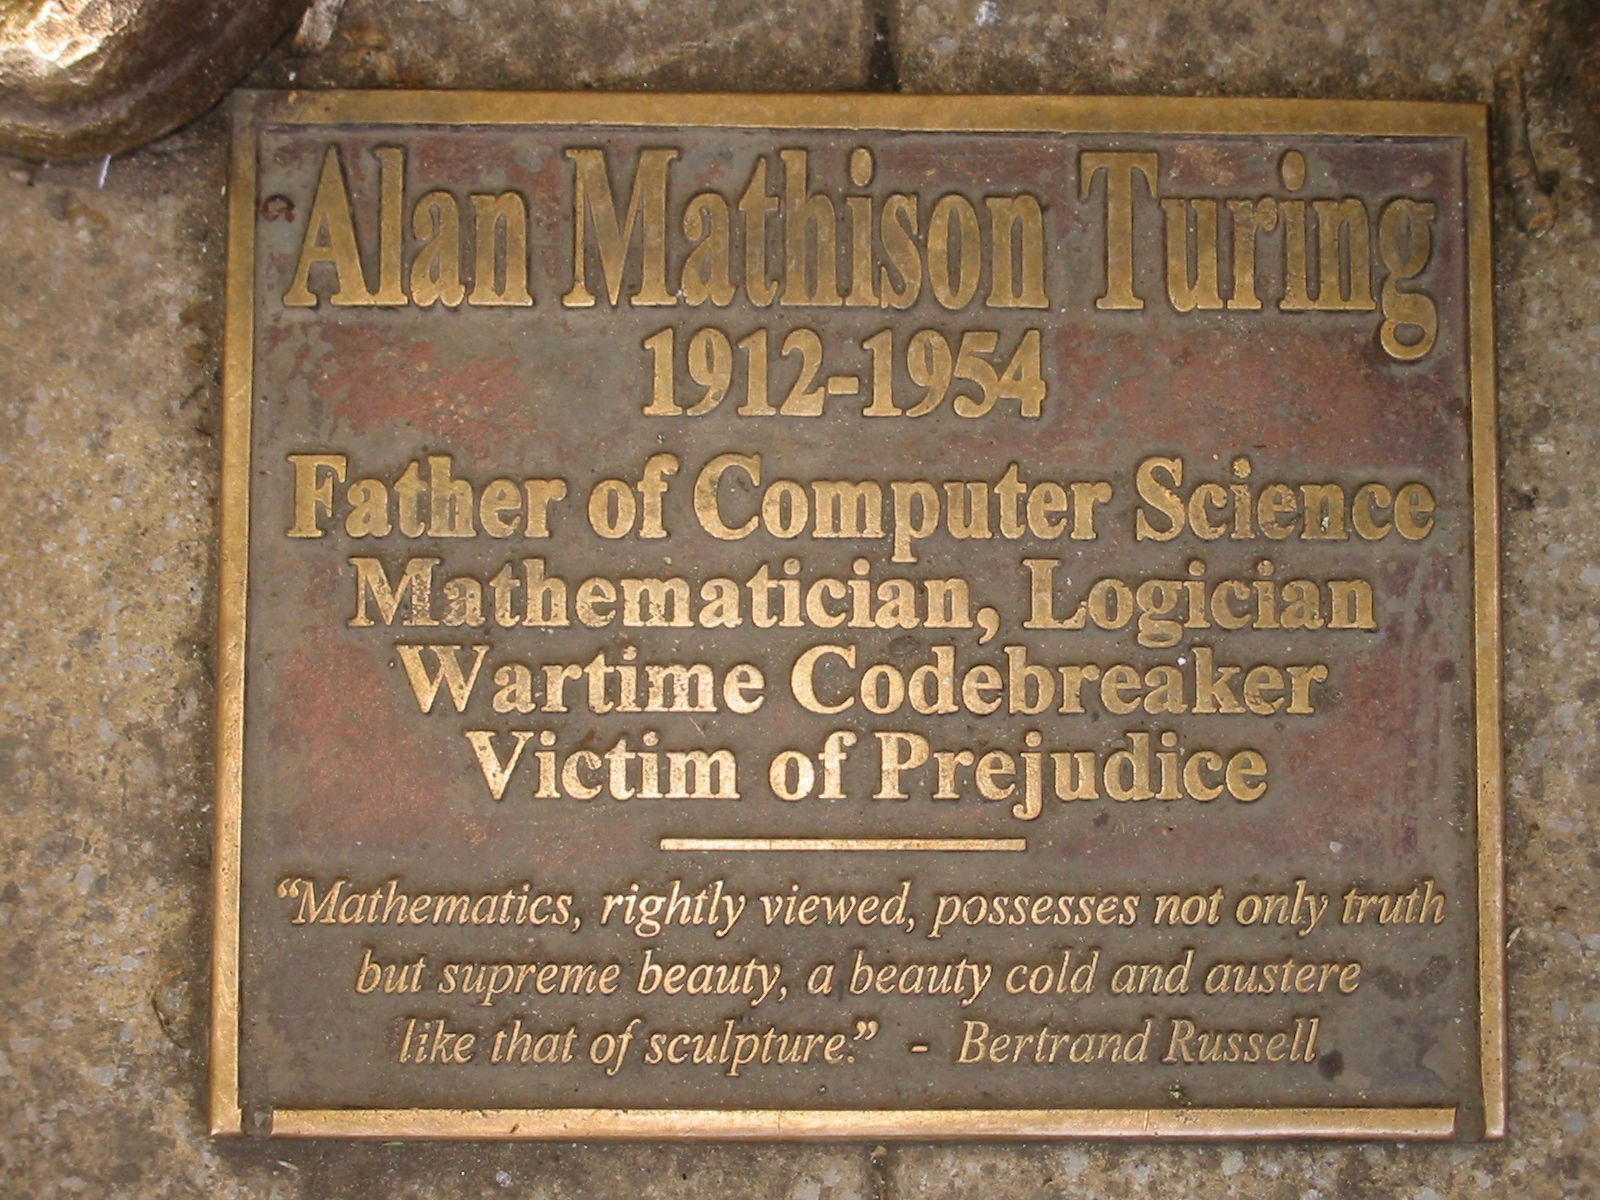 The Alan Turing law